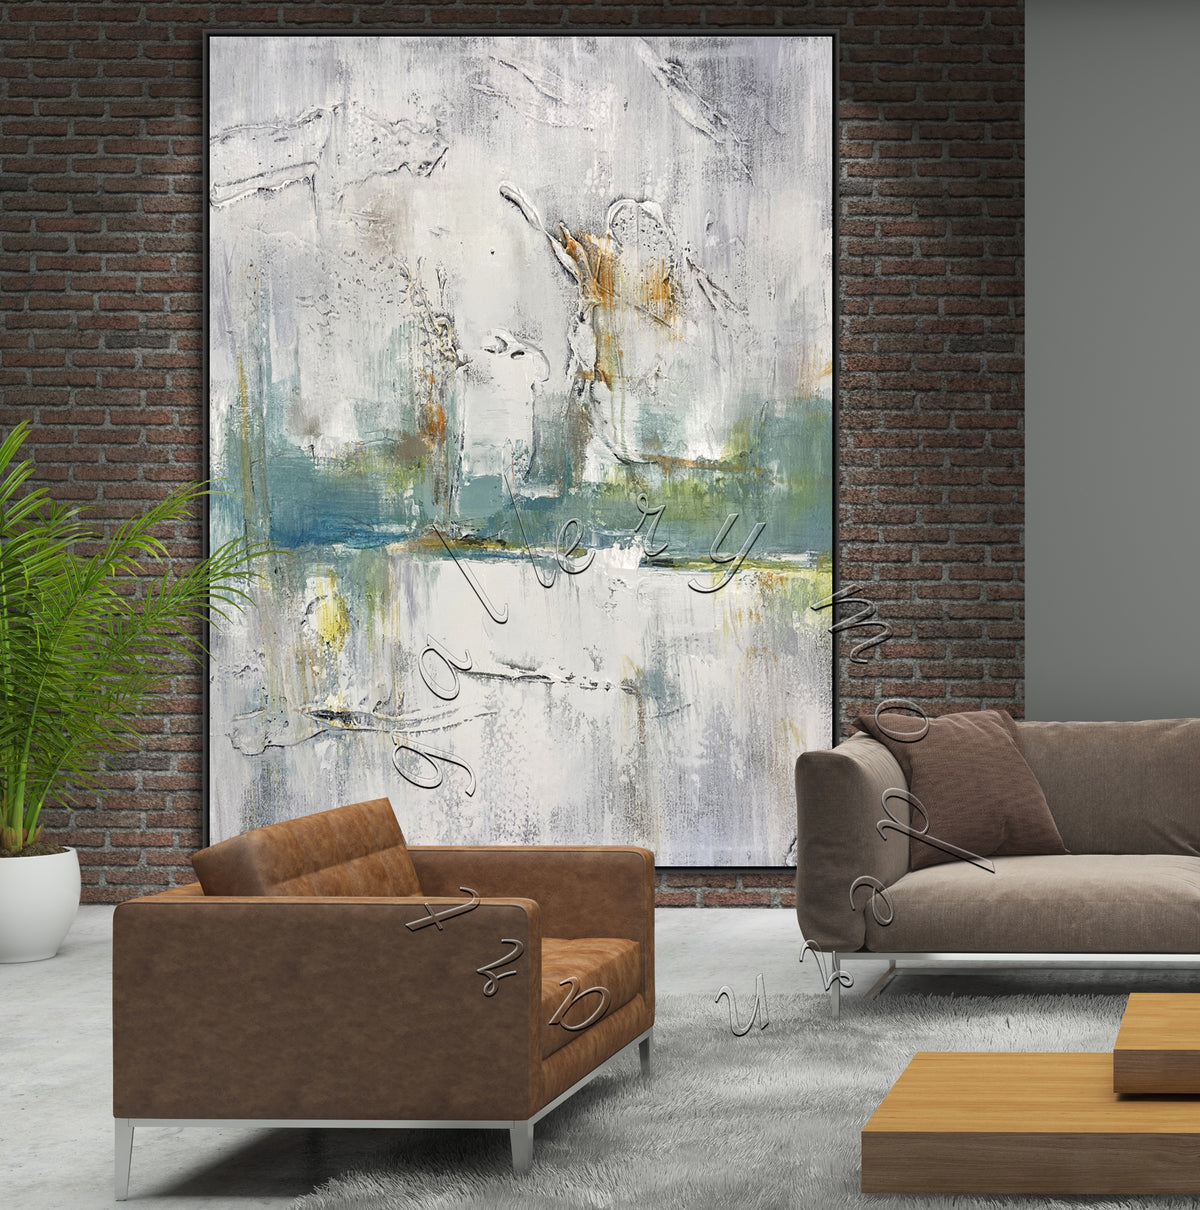 Textured Abstract Original Painting on Canvas, Soft Oversized Modern Wall Art